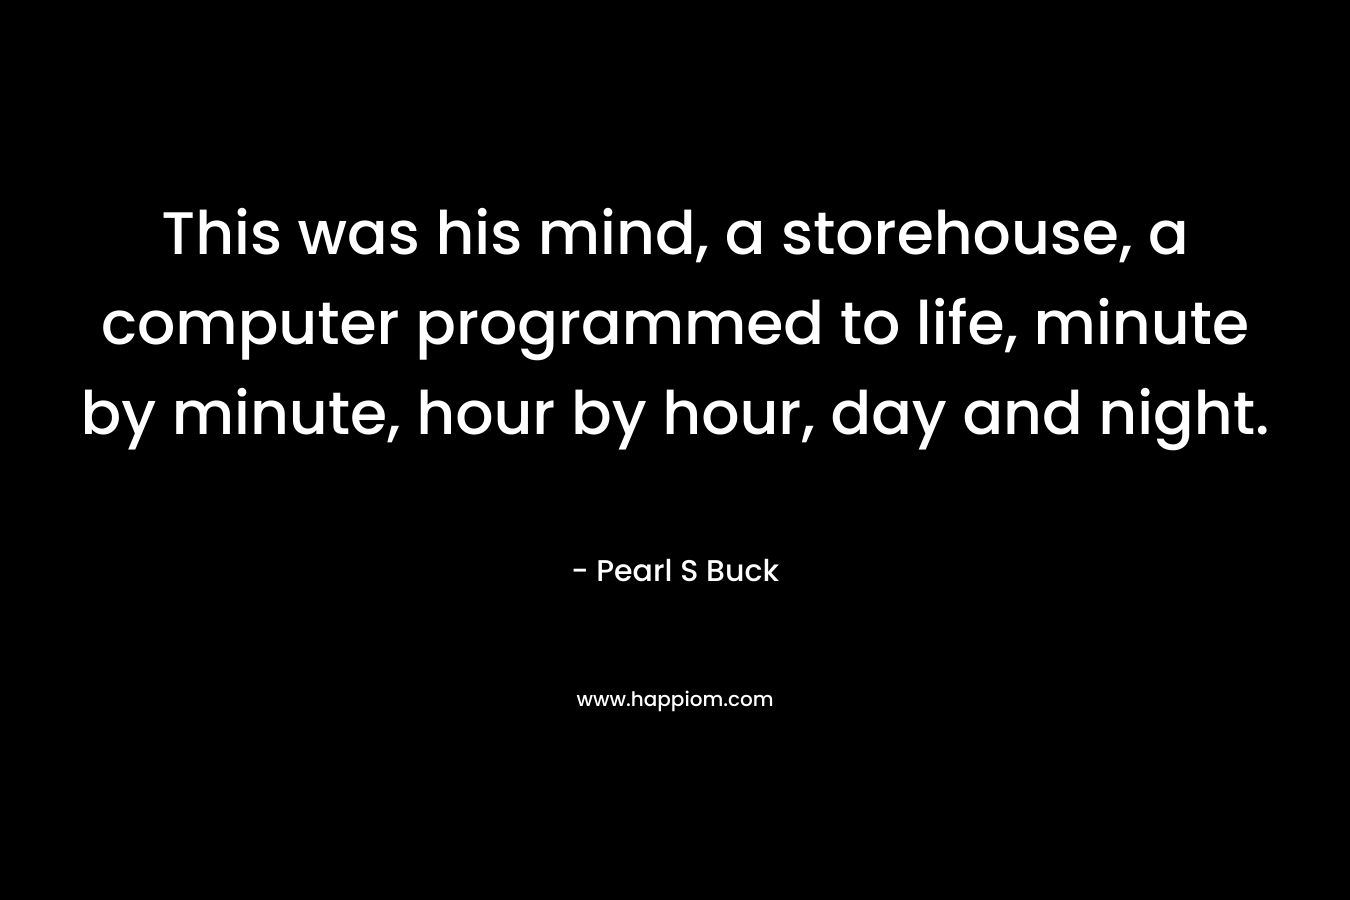 This was his mind, a storehouse, a computer programmed to life, minute by minute, hour by hour, day and night.